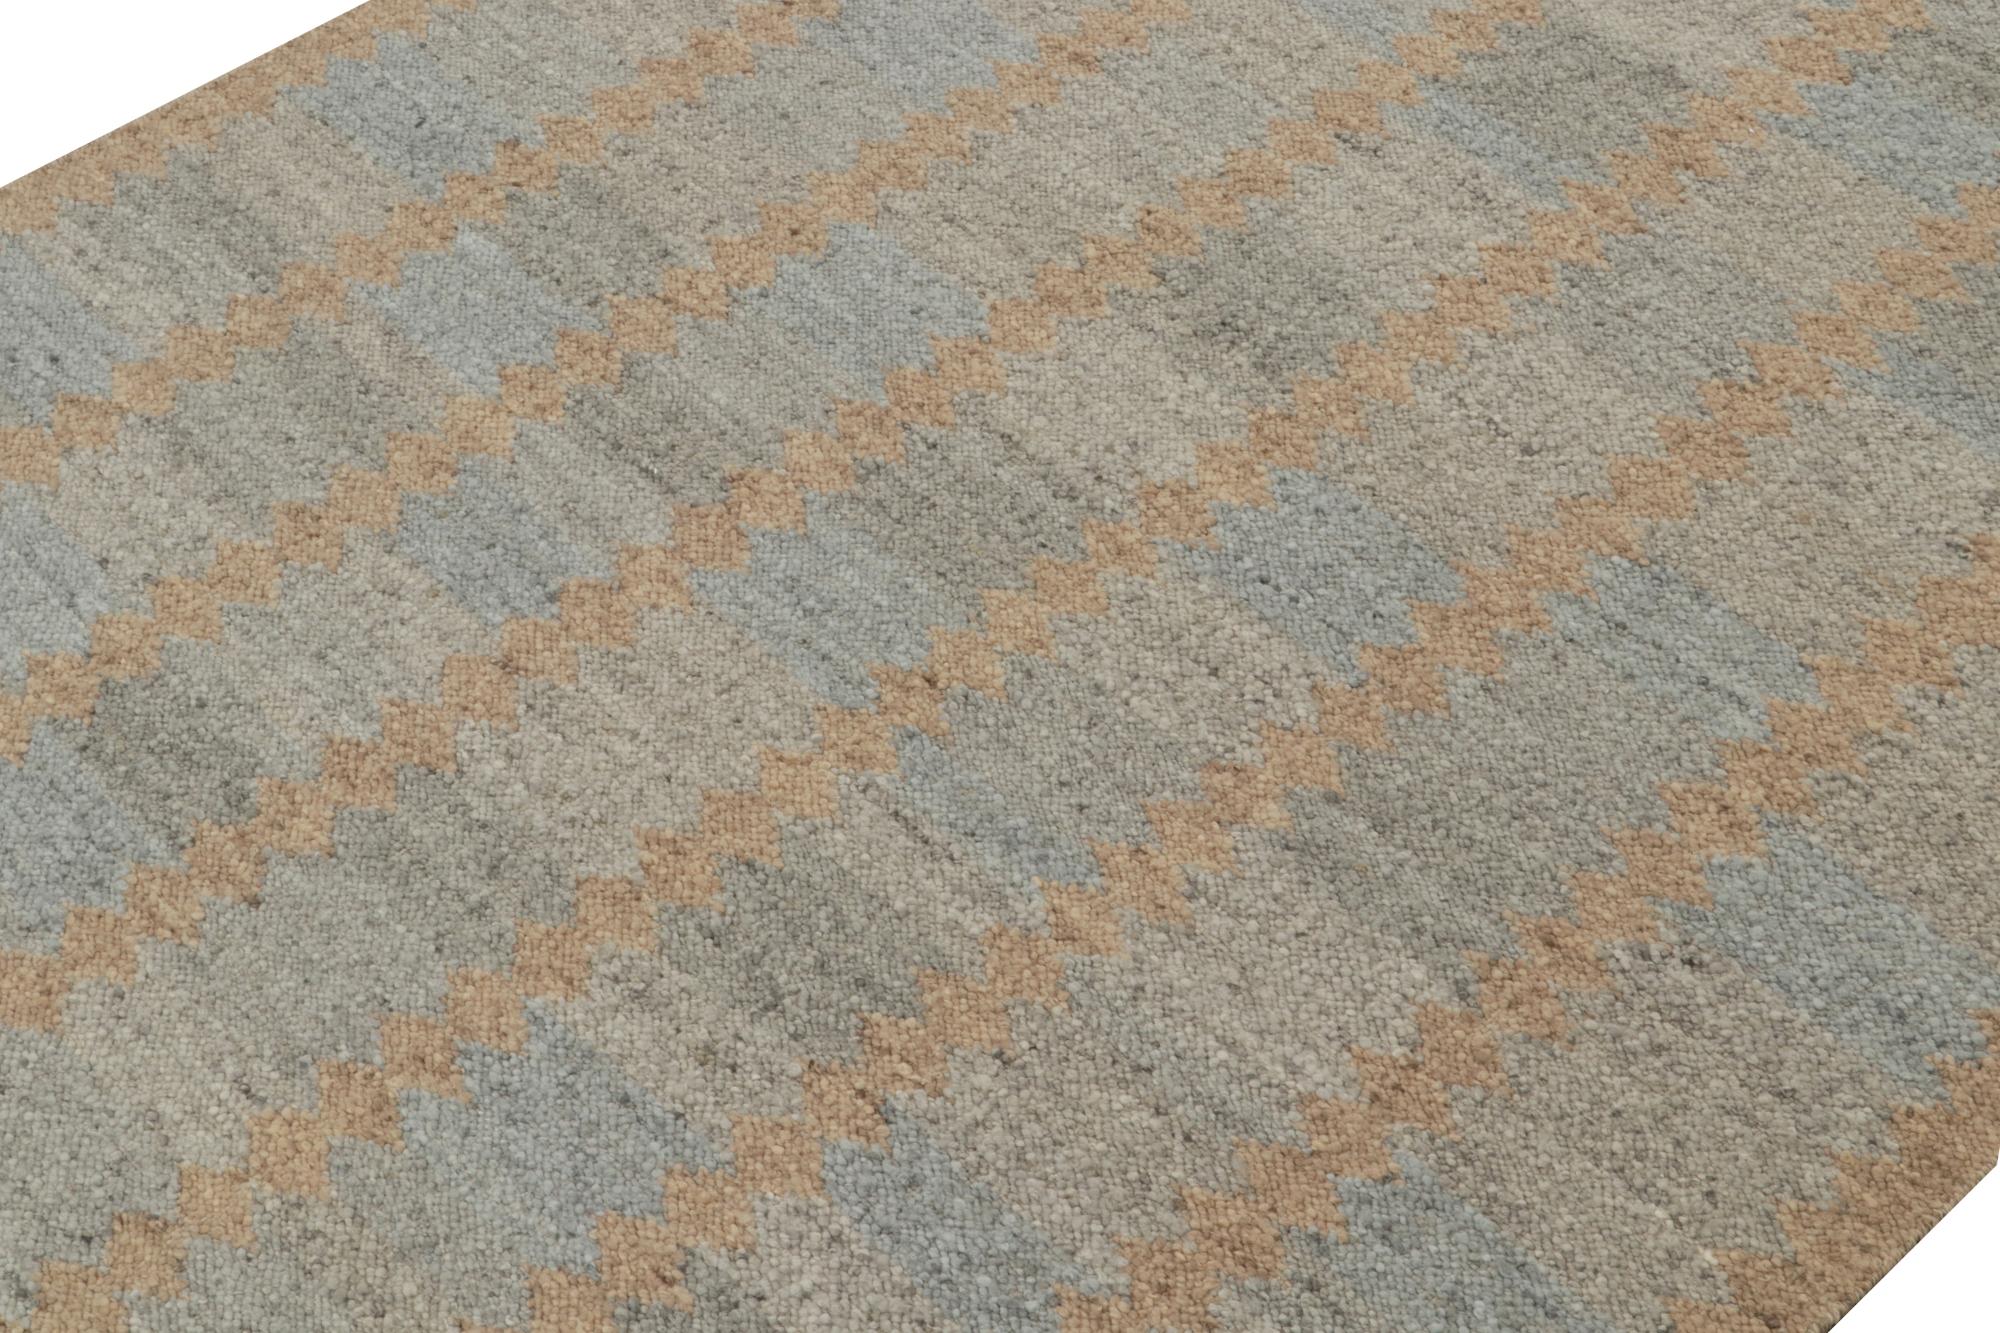 This 8x10 Swedish style kilim is from the inventive “Nu” texture in Rug & Kilim’s award-winning Scandinavian flat weave collection. Handwoven in wool. 

Further On the Design:

This rug enjoys a boucle-like texture of blended yarns, and a look